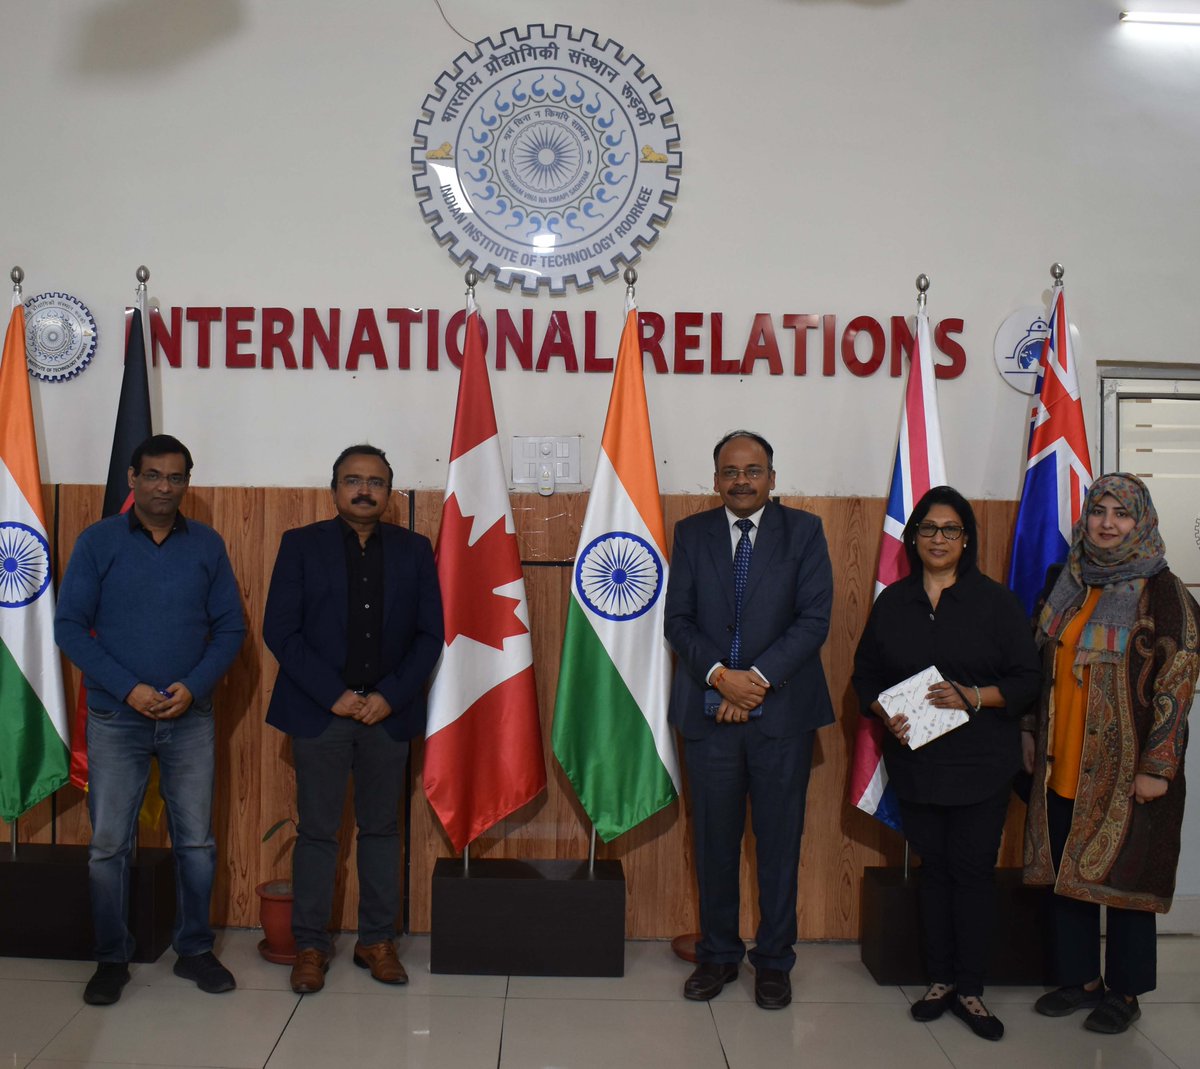 The International Relations Office of IIT Roorkee had the pleasure of hosting the esteemed team from the Shastri Indo-Canadian Institute, Calgary, Canada. For more details click here👇 ir.iitr.ac.in/blog/posts/154… #shastriindocanadianinstitute #iitroorkee #partnerships